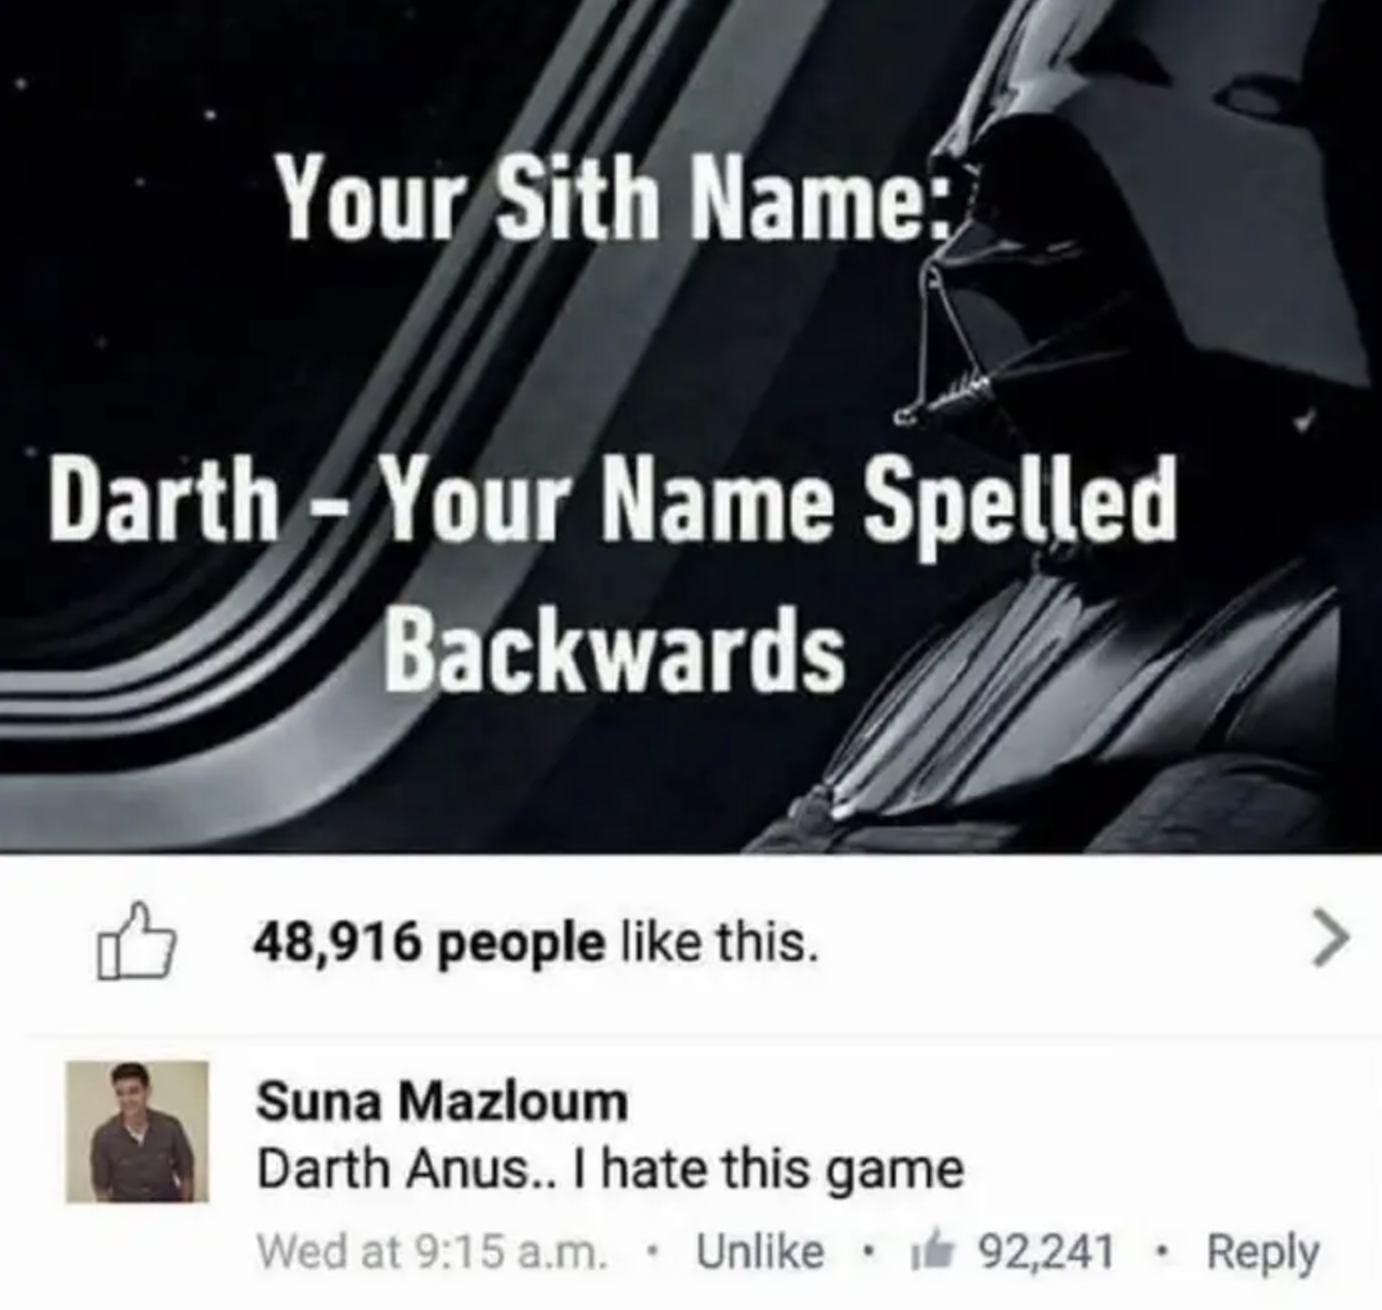 facebook post that says your sith name darth and your named spelled backwards and the guy&#x27;s name is suna